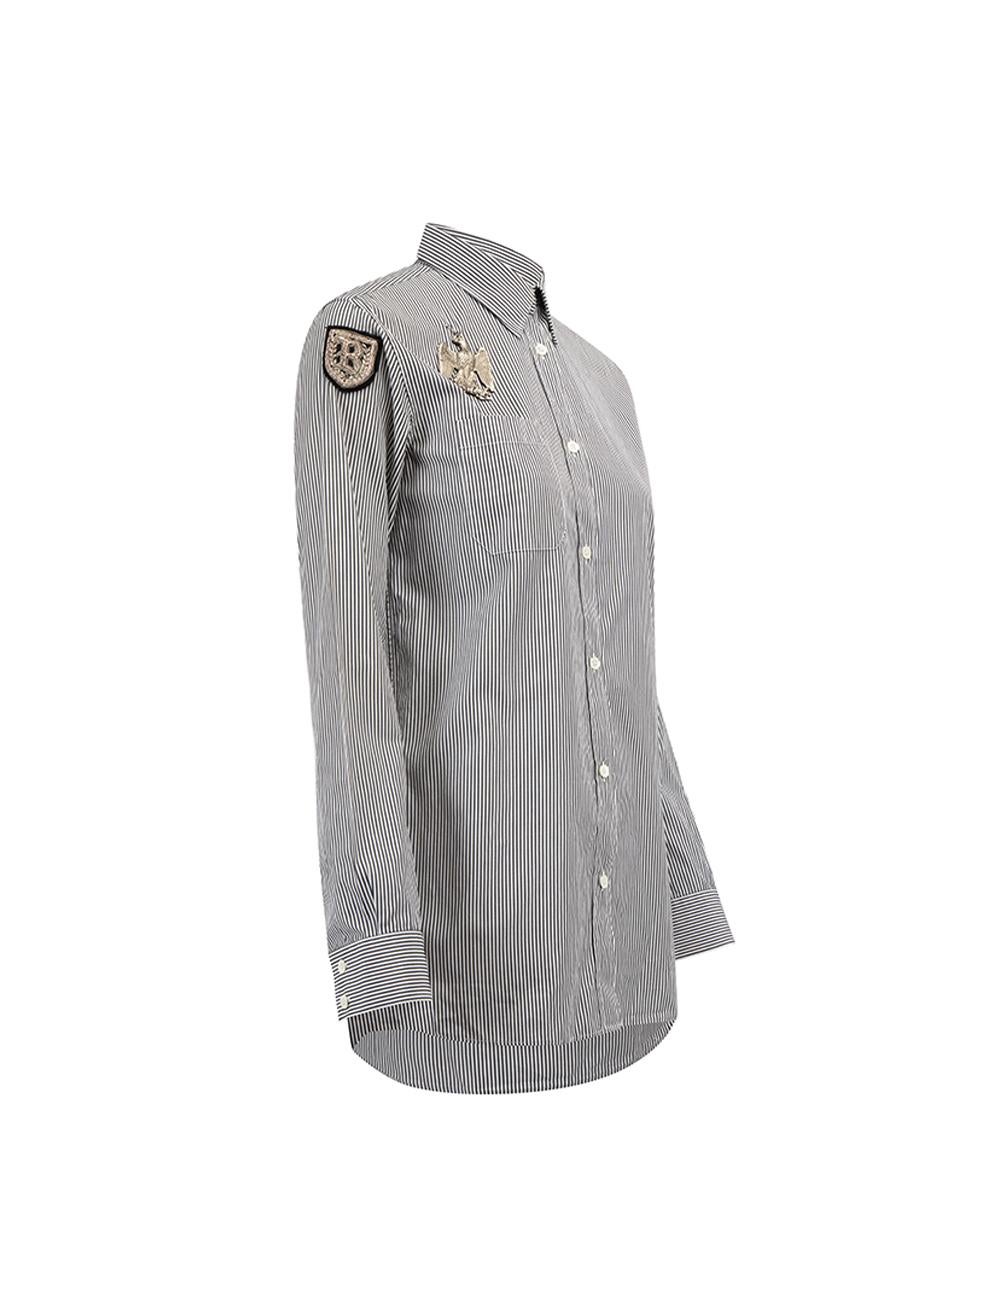 CONDITION is Very good. Minimal wear to the shirt is evident. Minimal wear to the B patch and the eagle brooch on this used Balmain designer resale item.   Details  Grey Cotton Long sleeves shirt Striped Buttoned cuffs Front button up closure B